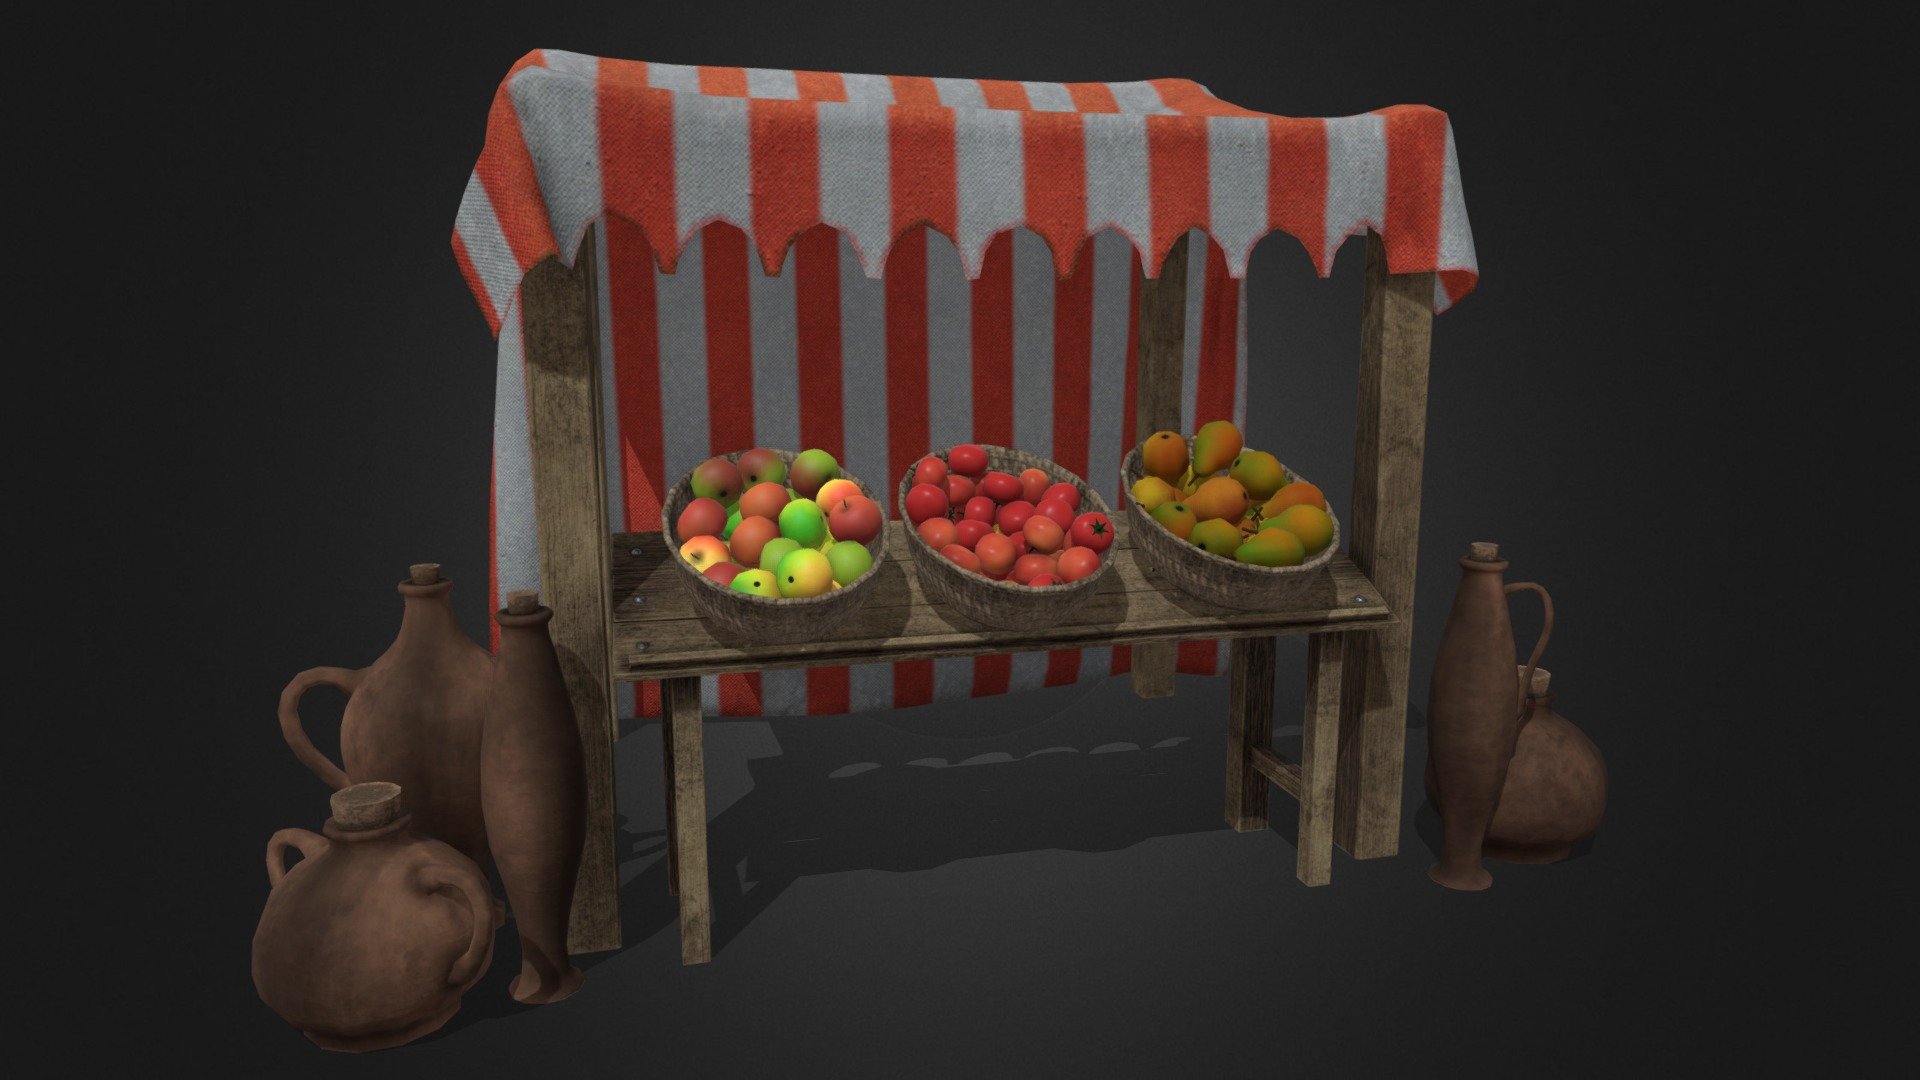 Here I used some of my other free 3D objects and adjusted the textures. This stall can perhaps serve as a starting point for your own modifications. 

The objects were placed in the baskets using a rigid body. Someone asked me how many apples, tomatoes and pears are in the baskets. We have:




Apples = 26 (26 x 128 = 3328 faces)

Tomatoes = 43 (26 x 206 = 8858 faces)

Pears = 21 (21 x 110 = 2310 faces)

It should not be too difficult to reduce the number of polygons by omitting some of them. 

Feel free to check out my other free models. Please support my work and sponsor me a coffee (black, no sugar) or give me a like or a comment 3d model